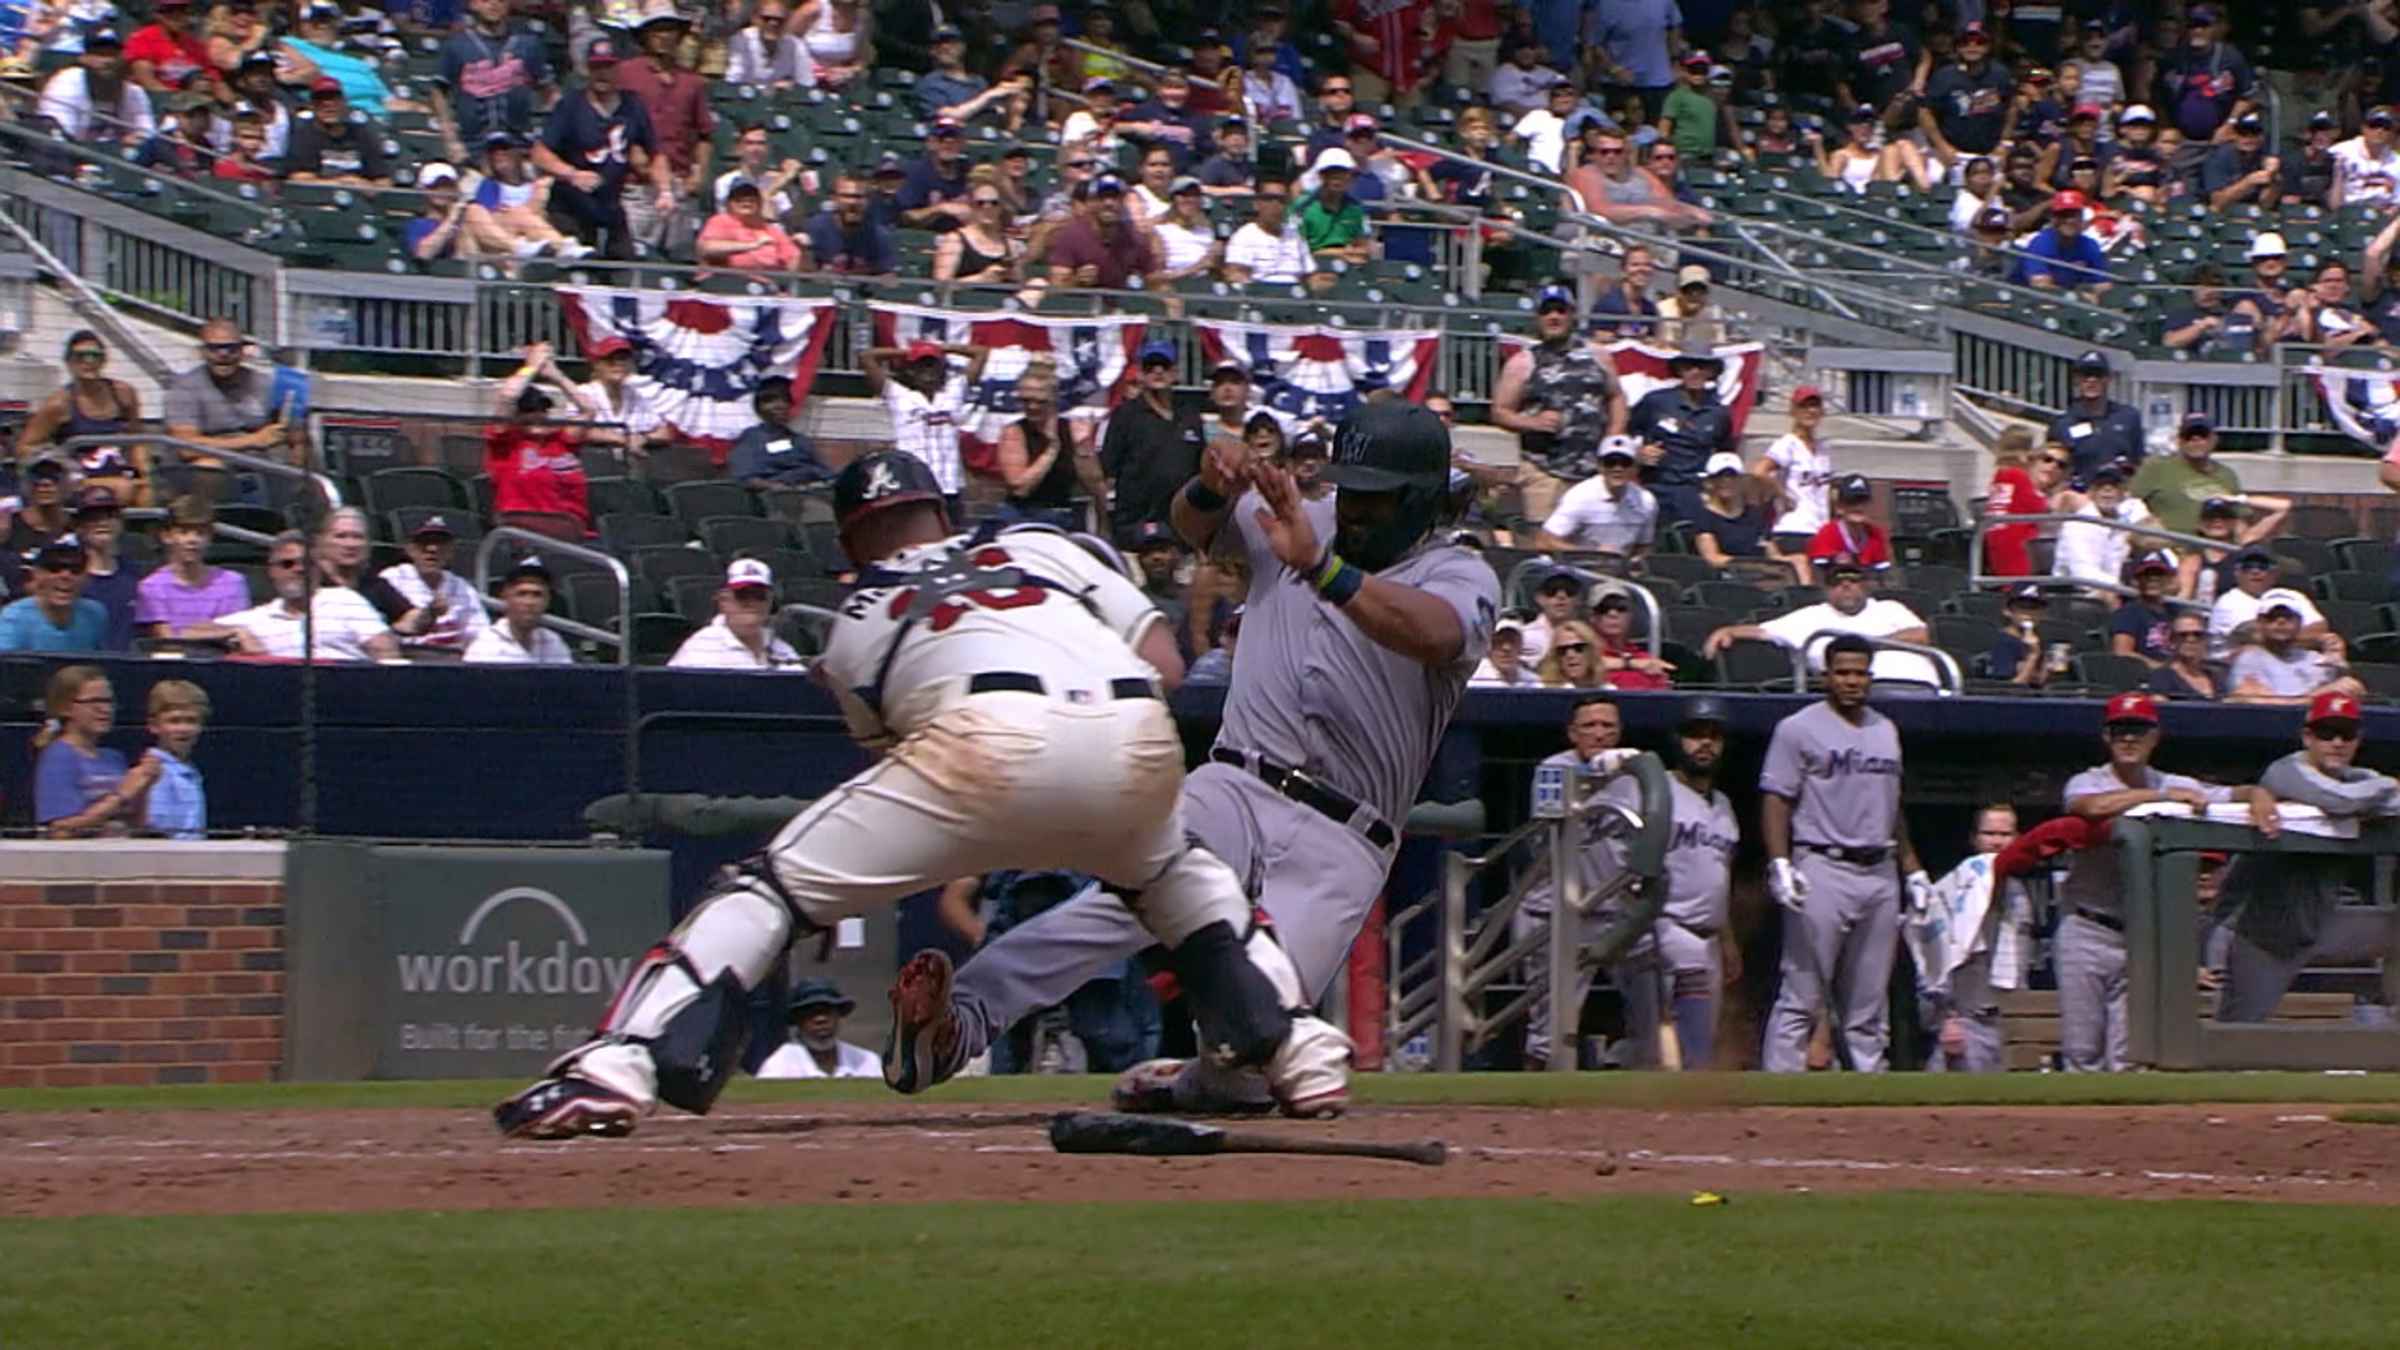 VIDEO: Charlie Culberson Saves the Braves With Perfect Throw on